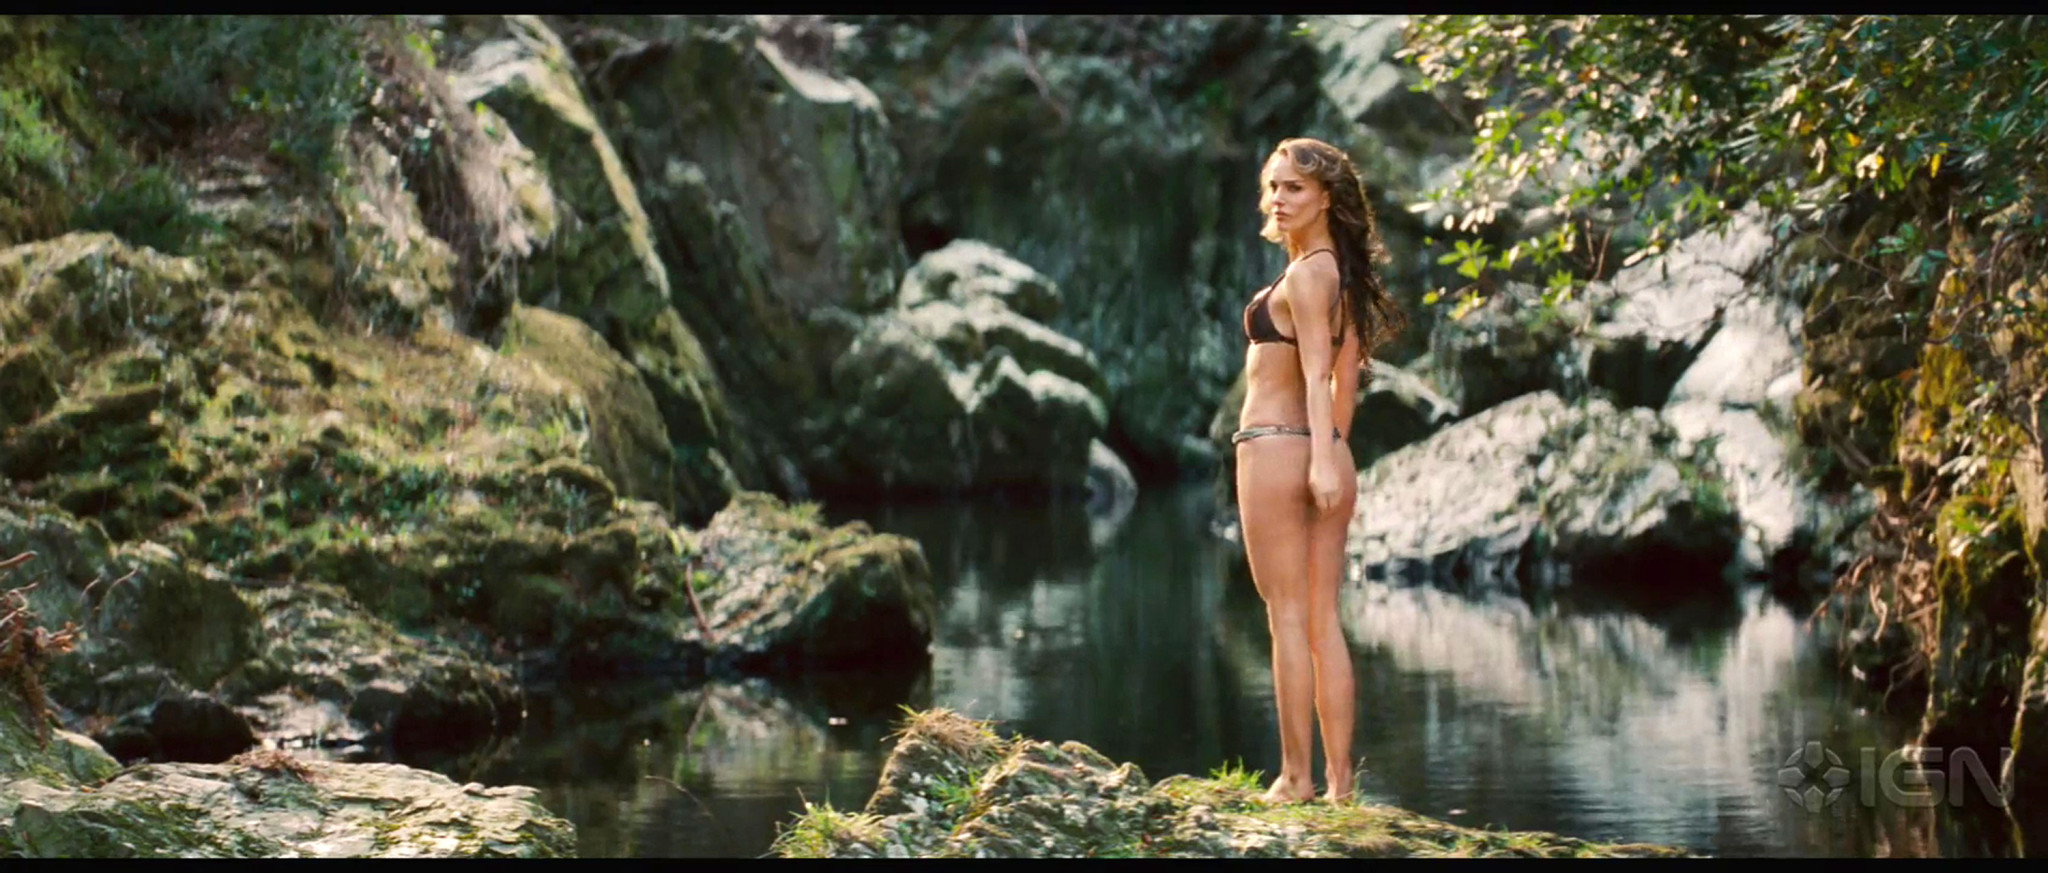 Natalie Portman exposing fucking sexy body and hot ass in thong #75326499